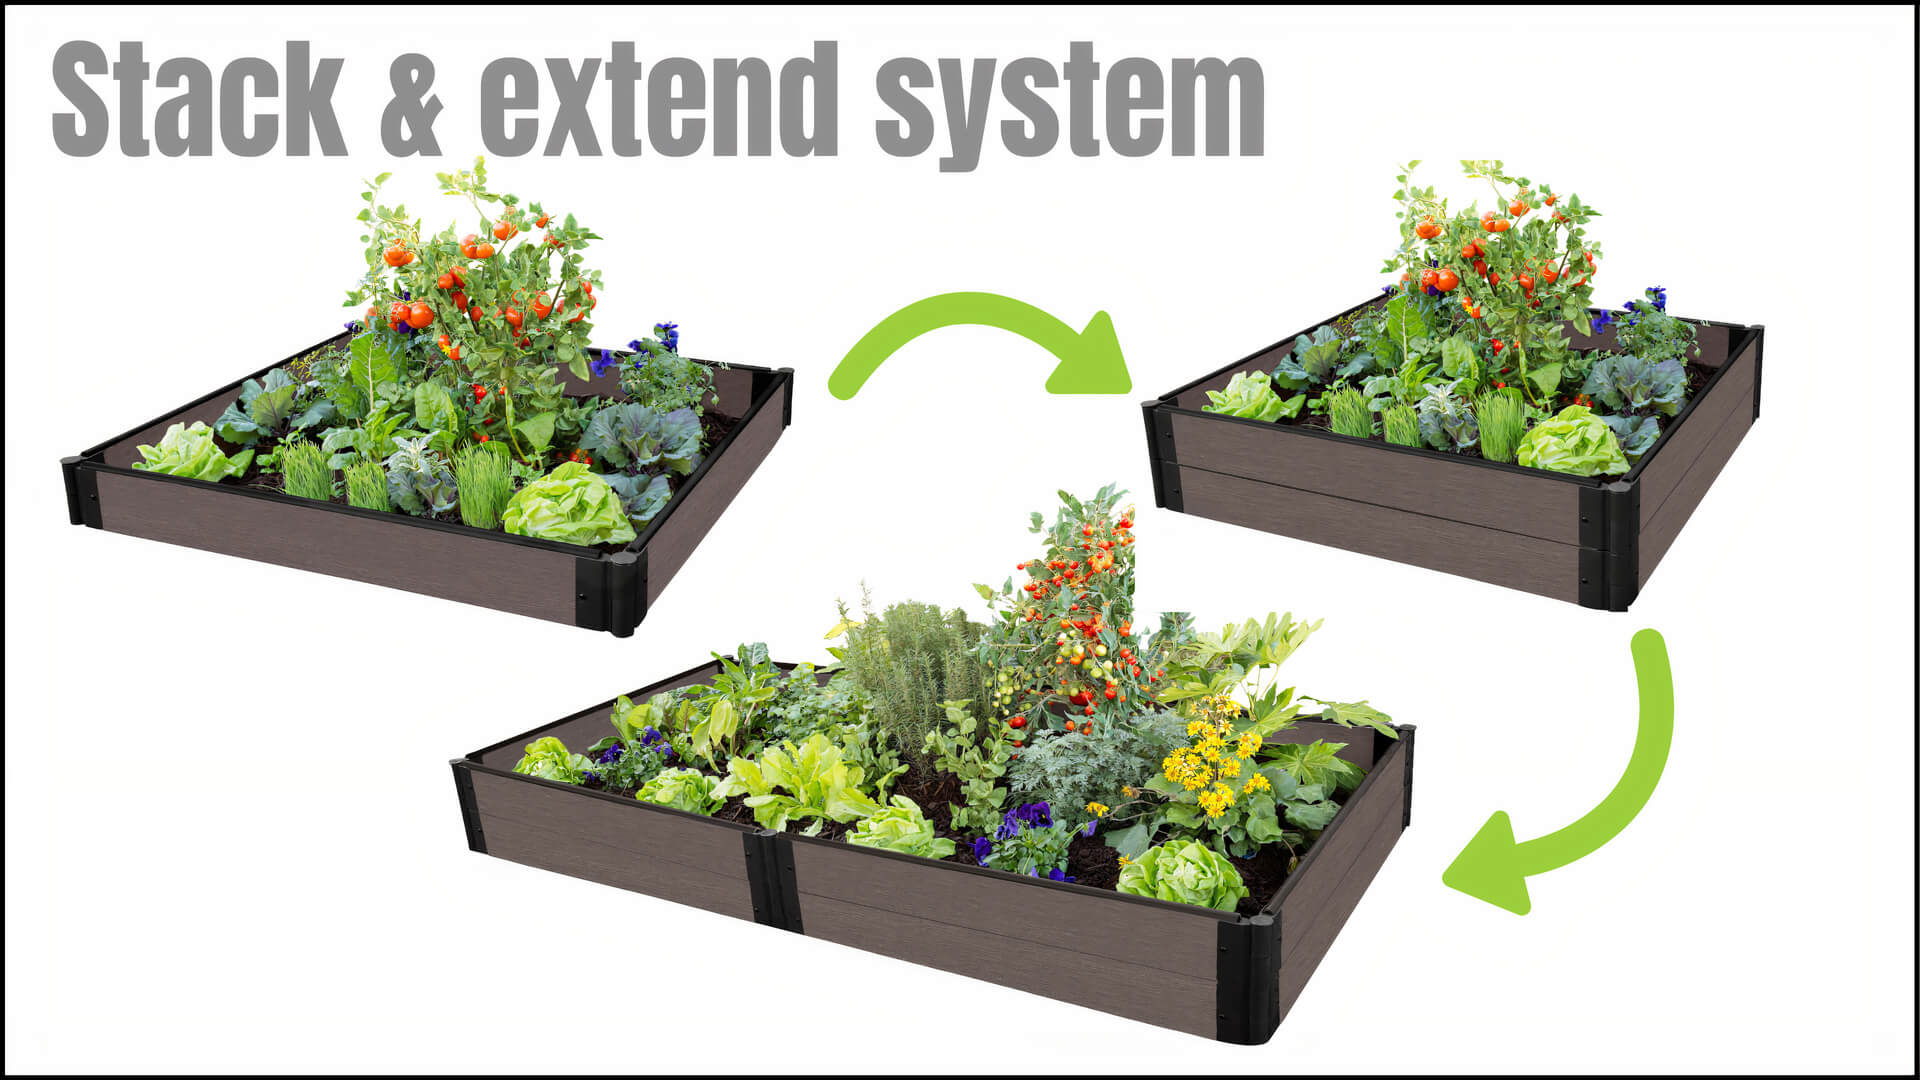 Raised Garden, Planter or Edging Designs - A,B,C 1 Inch Profile Kits Frame It All 